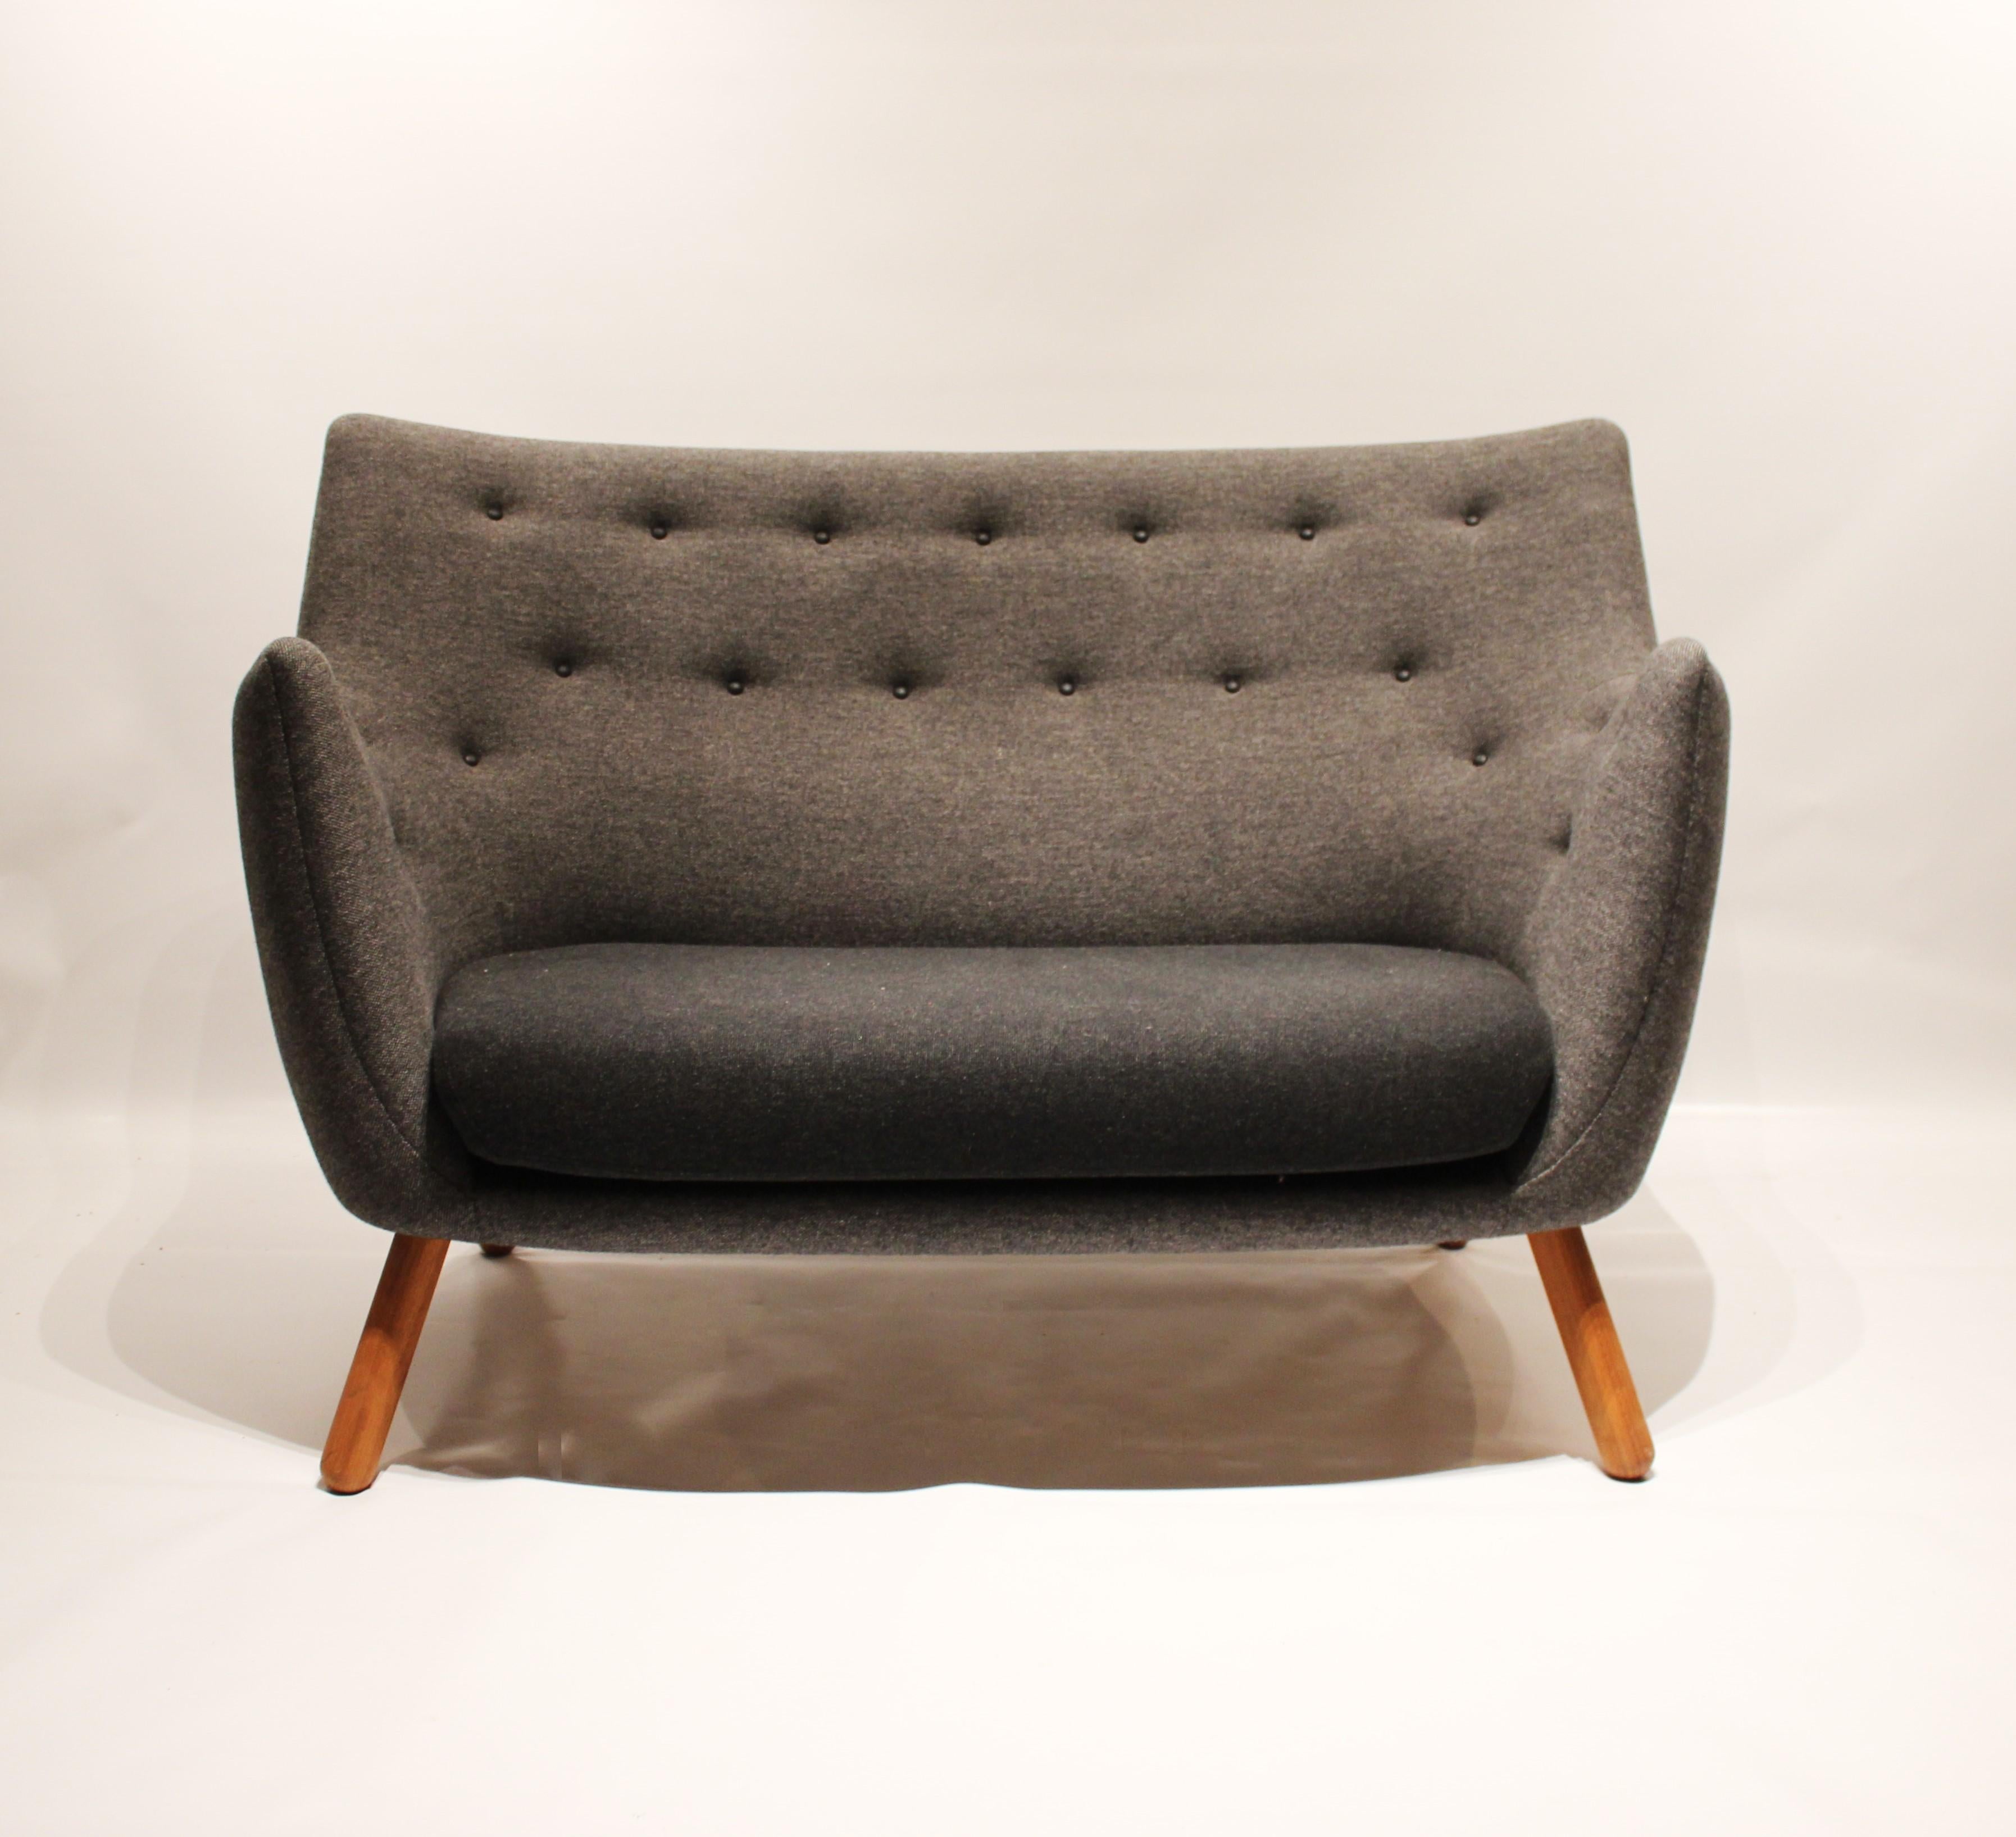 Poet rime sofa, model FJ4100, designed by Finn Juhl in 1941 and manufactured by Onecollection. The chair is upholstered with dark grey Hallingdal and legs of walnut.